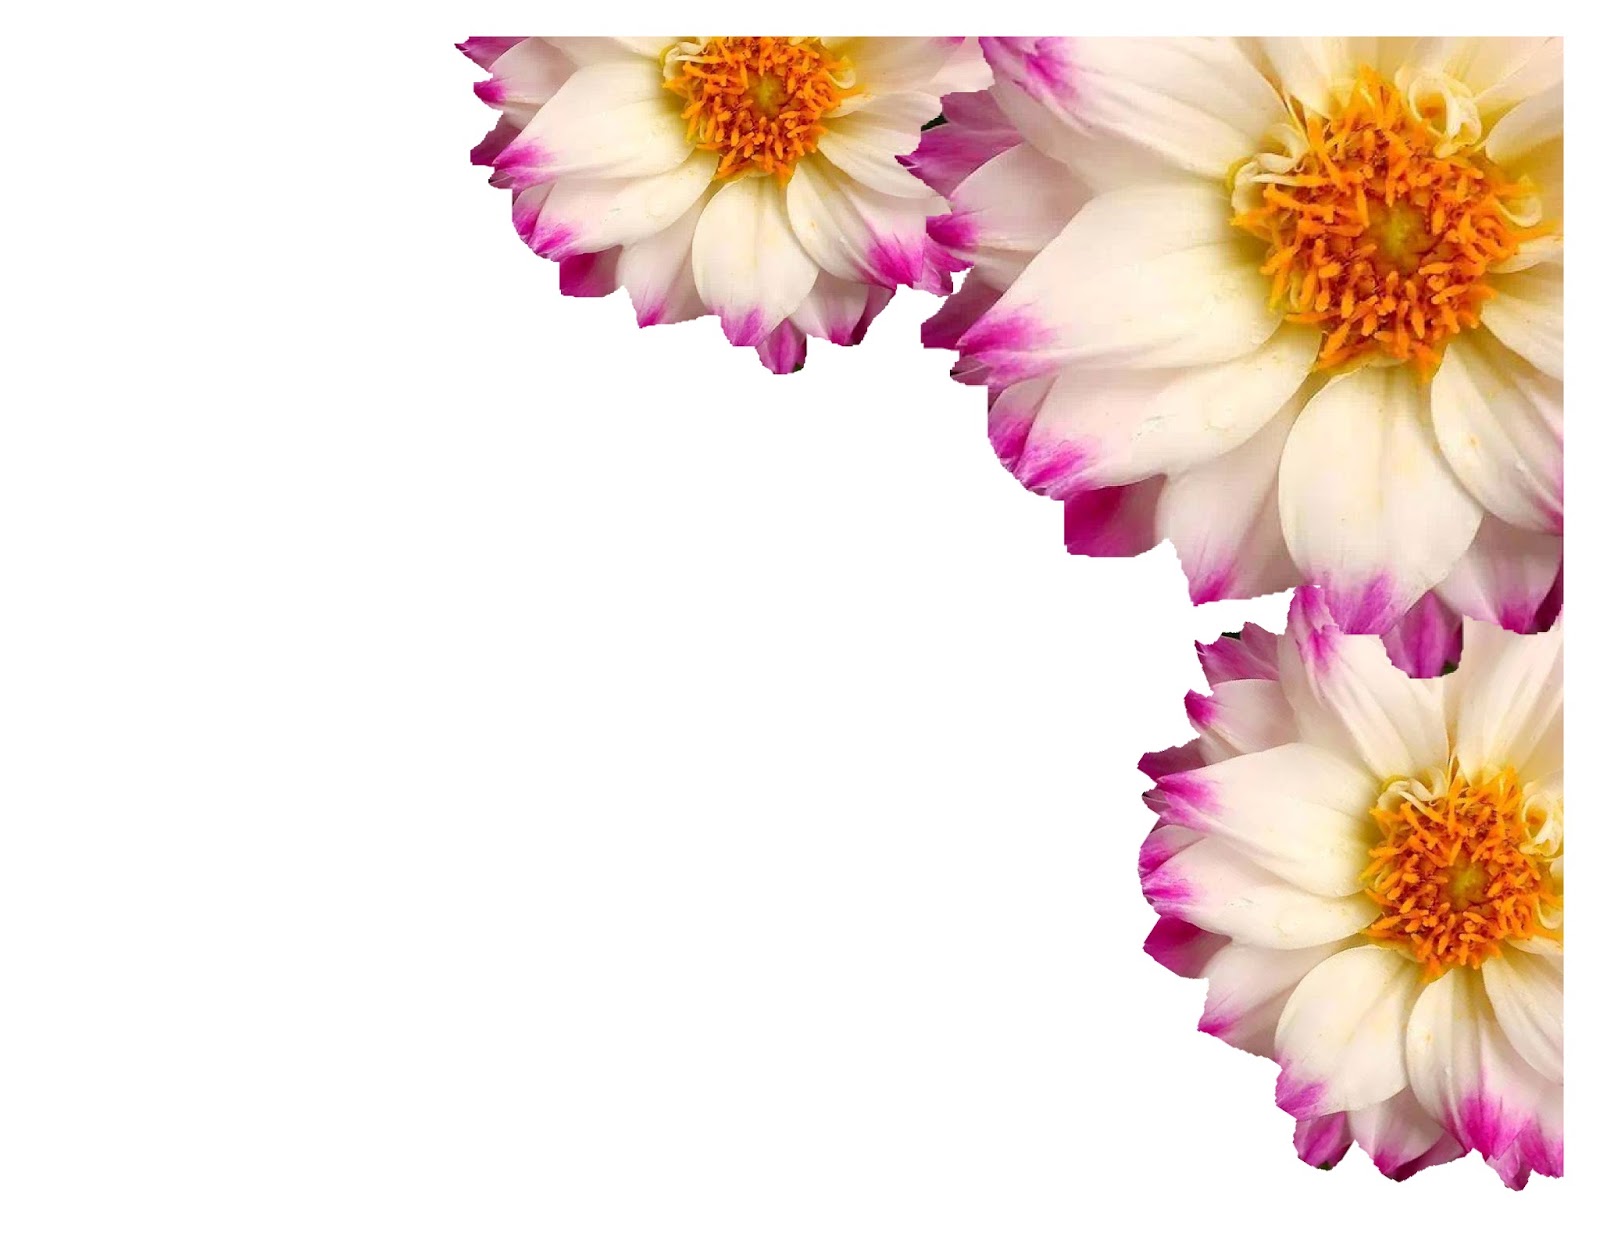 Real beautiful flower border background picture 